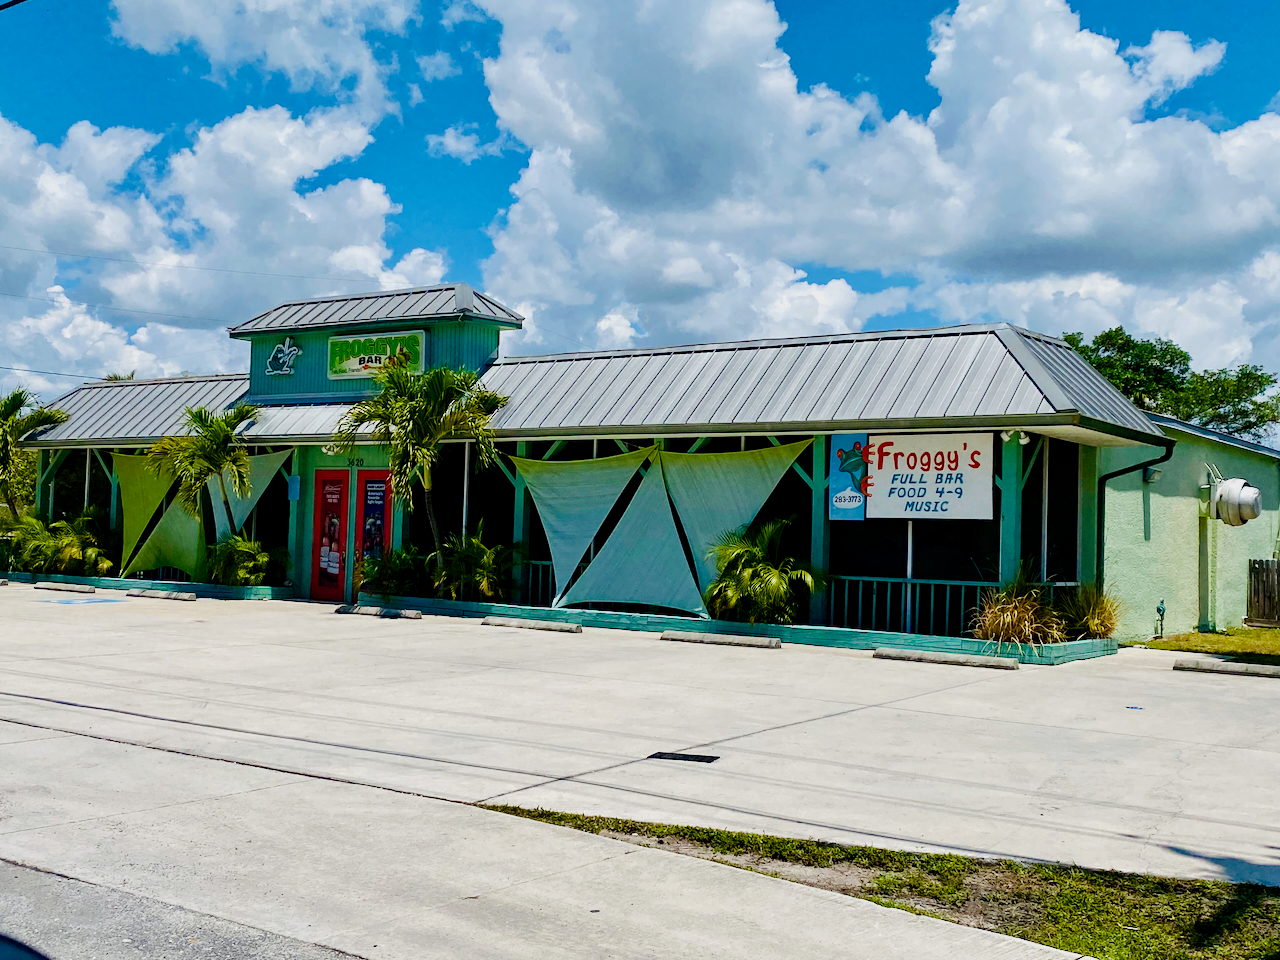 Exterior photo of the green Froggy's building, one of the favorite things to do on Pine Island.  